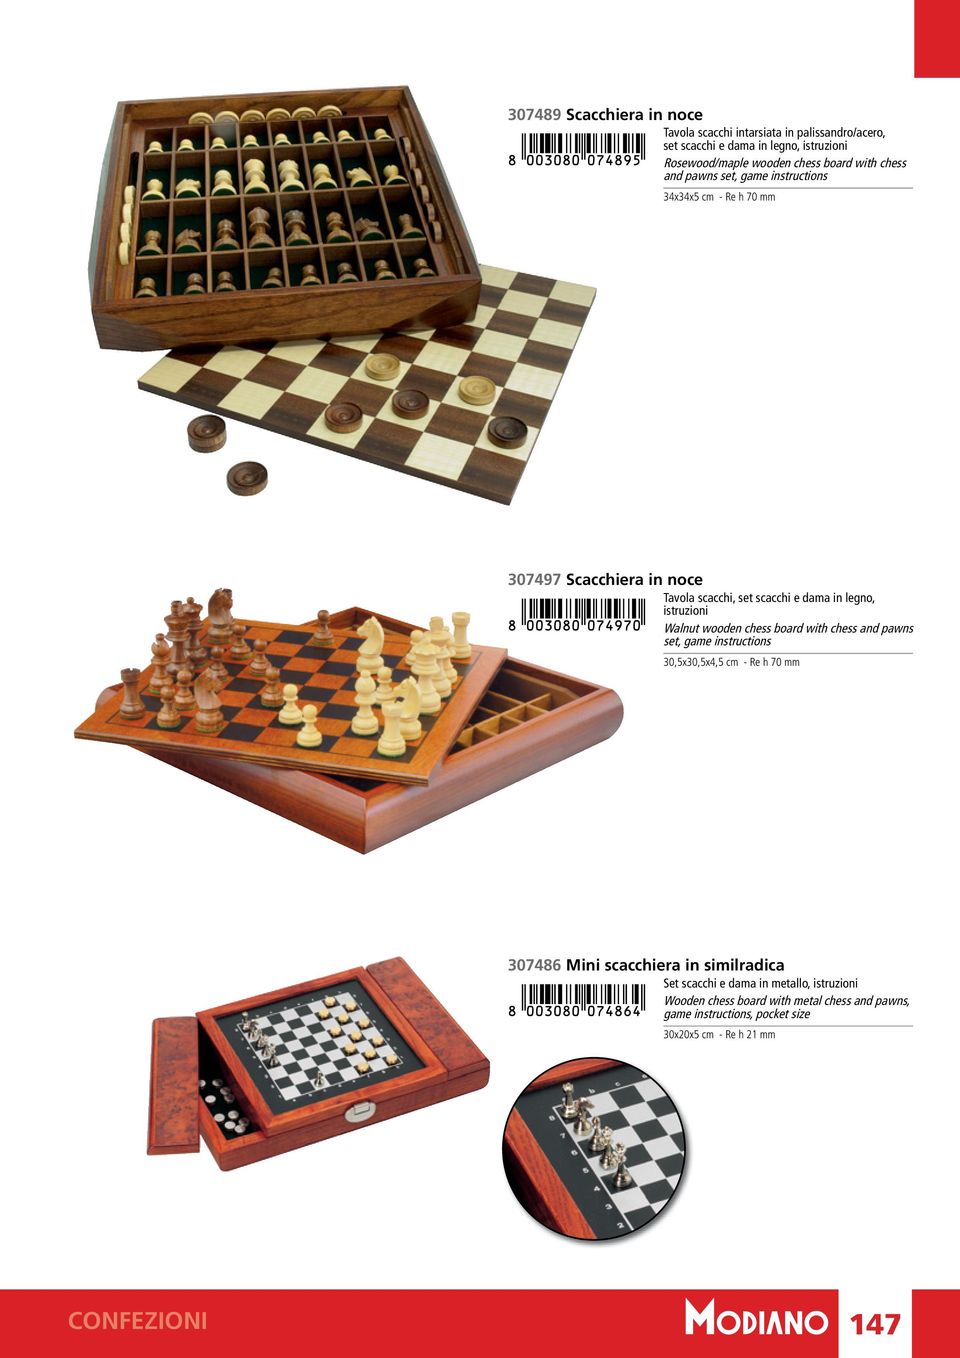 istruzioni Walnut wooden chess board with chess and pawns set, game instructions 30,5x30,5x4,5 cm - Re h 70 mm 307486 Mini scacchiera in similradica